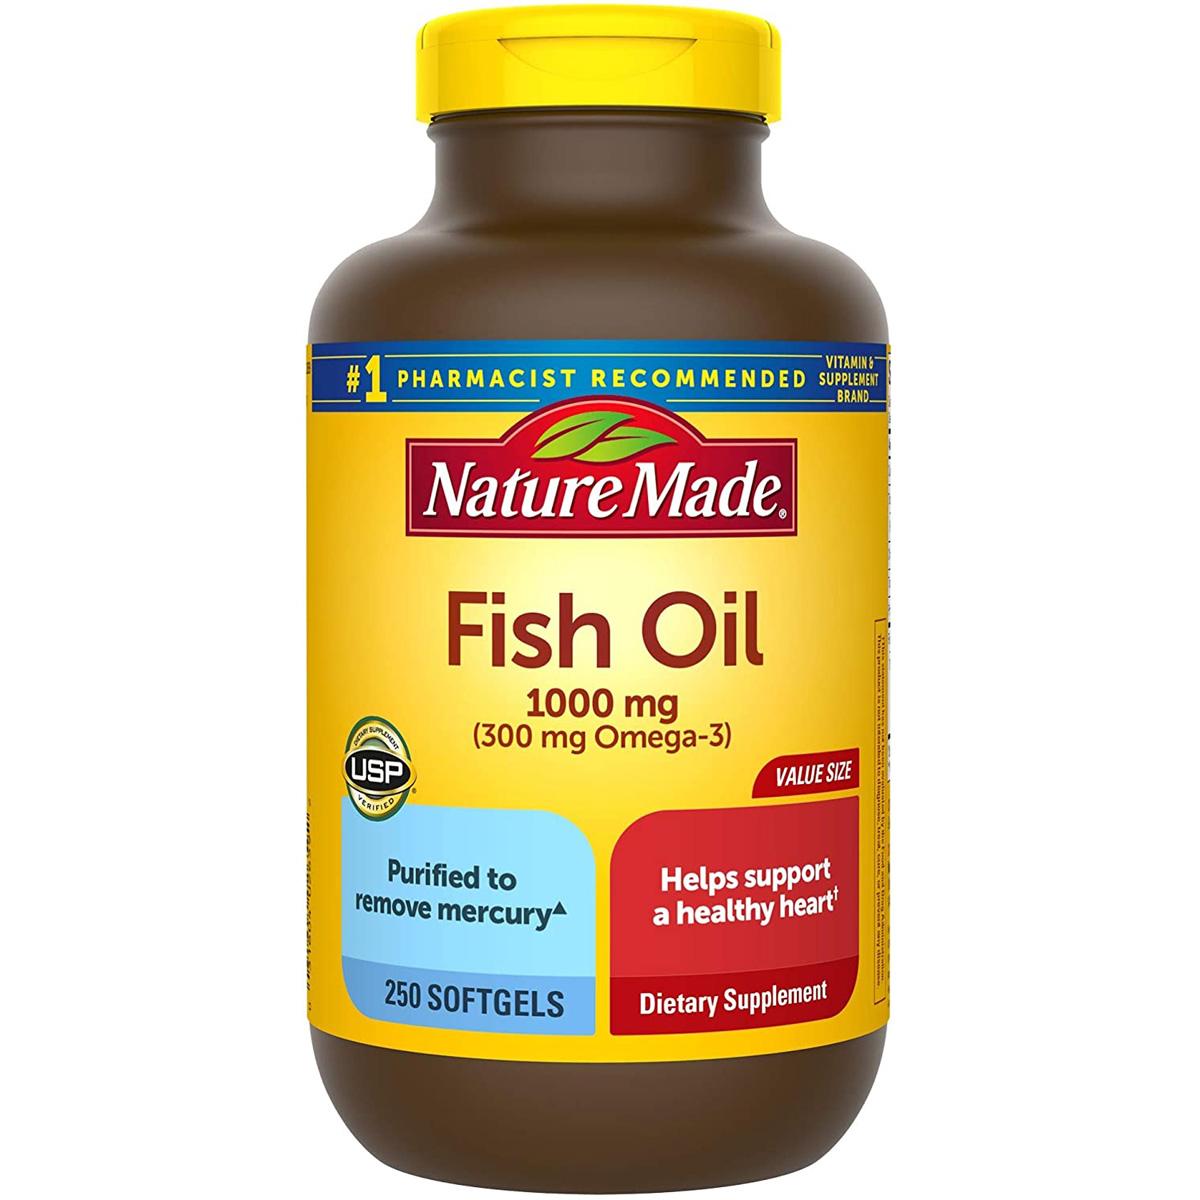 250 Nature Made Fish Oil Tablets for $6.59 Shipped